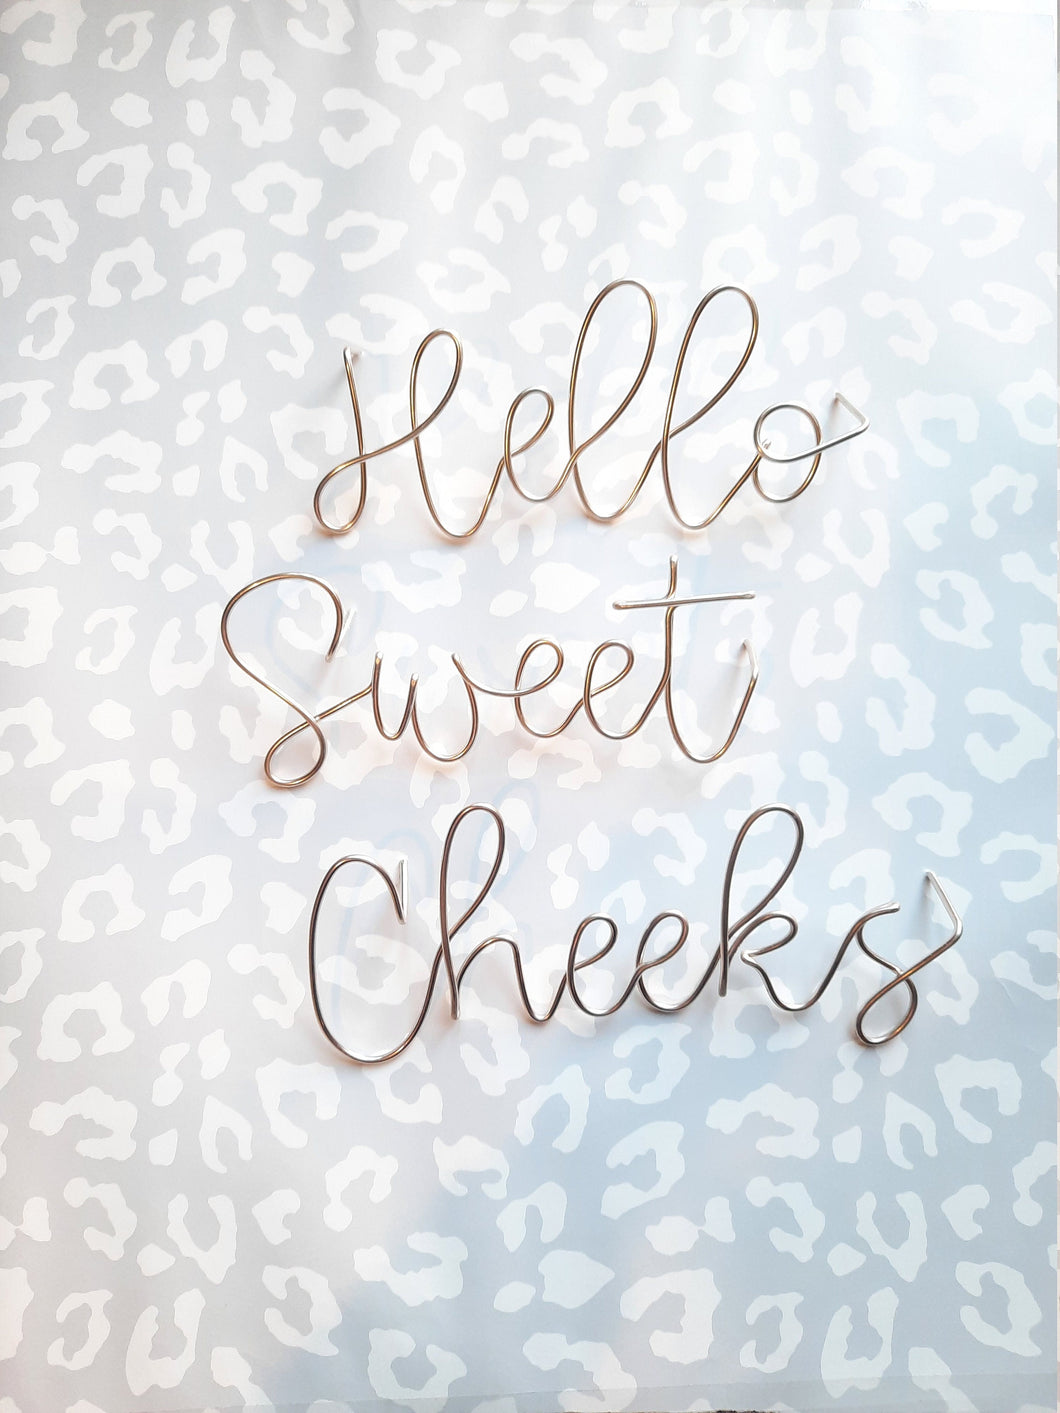 Wire Hello Sweet Cheeks wall sign